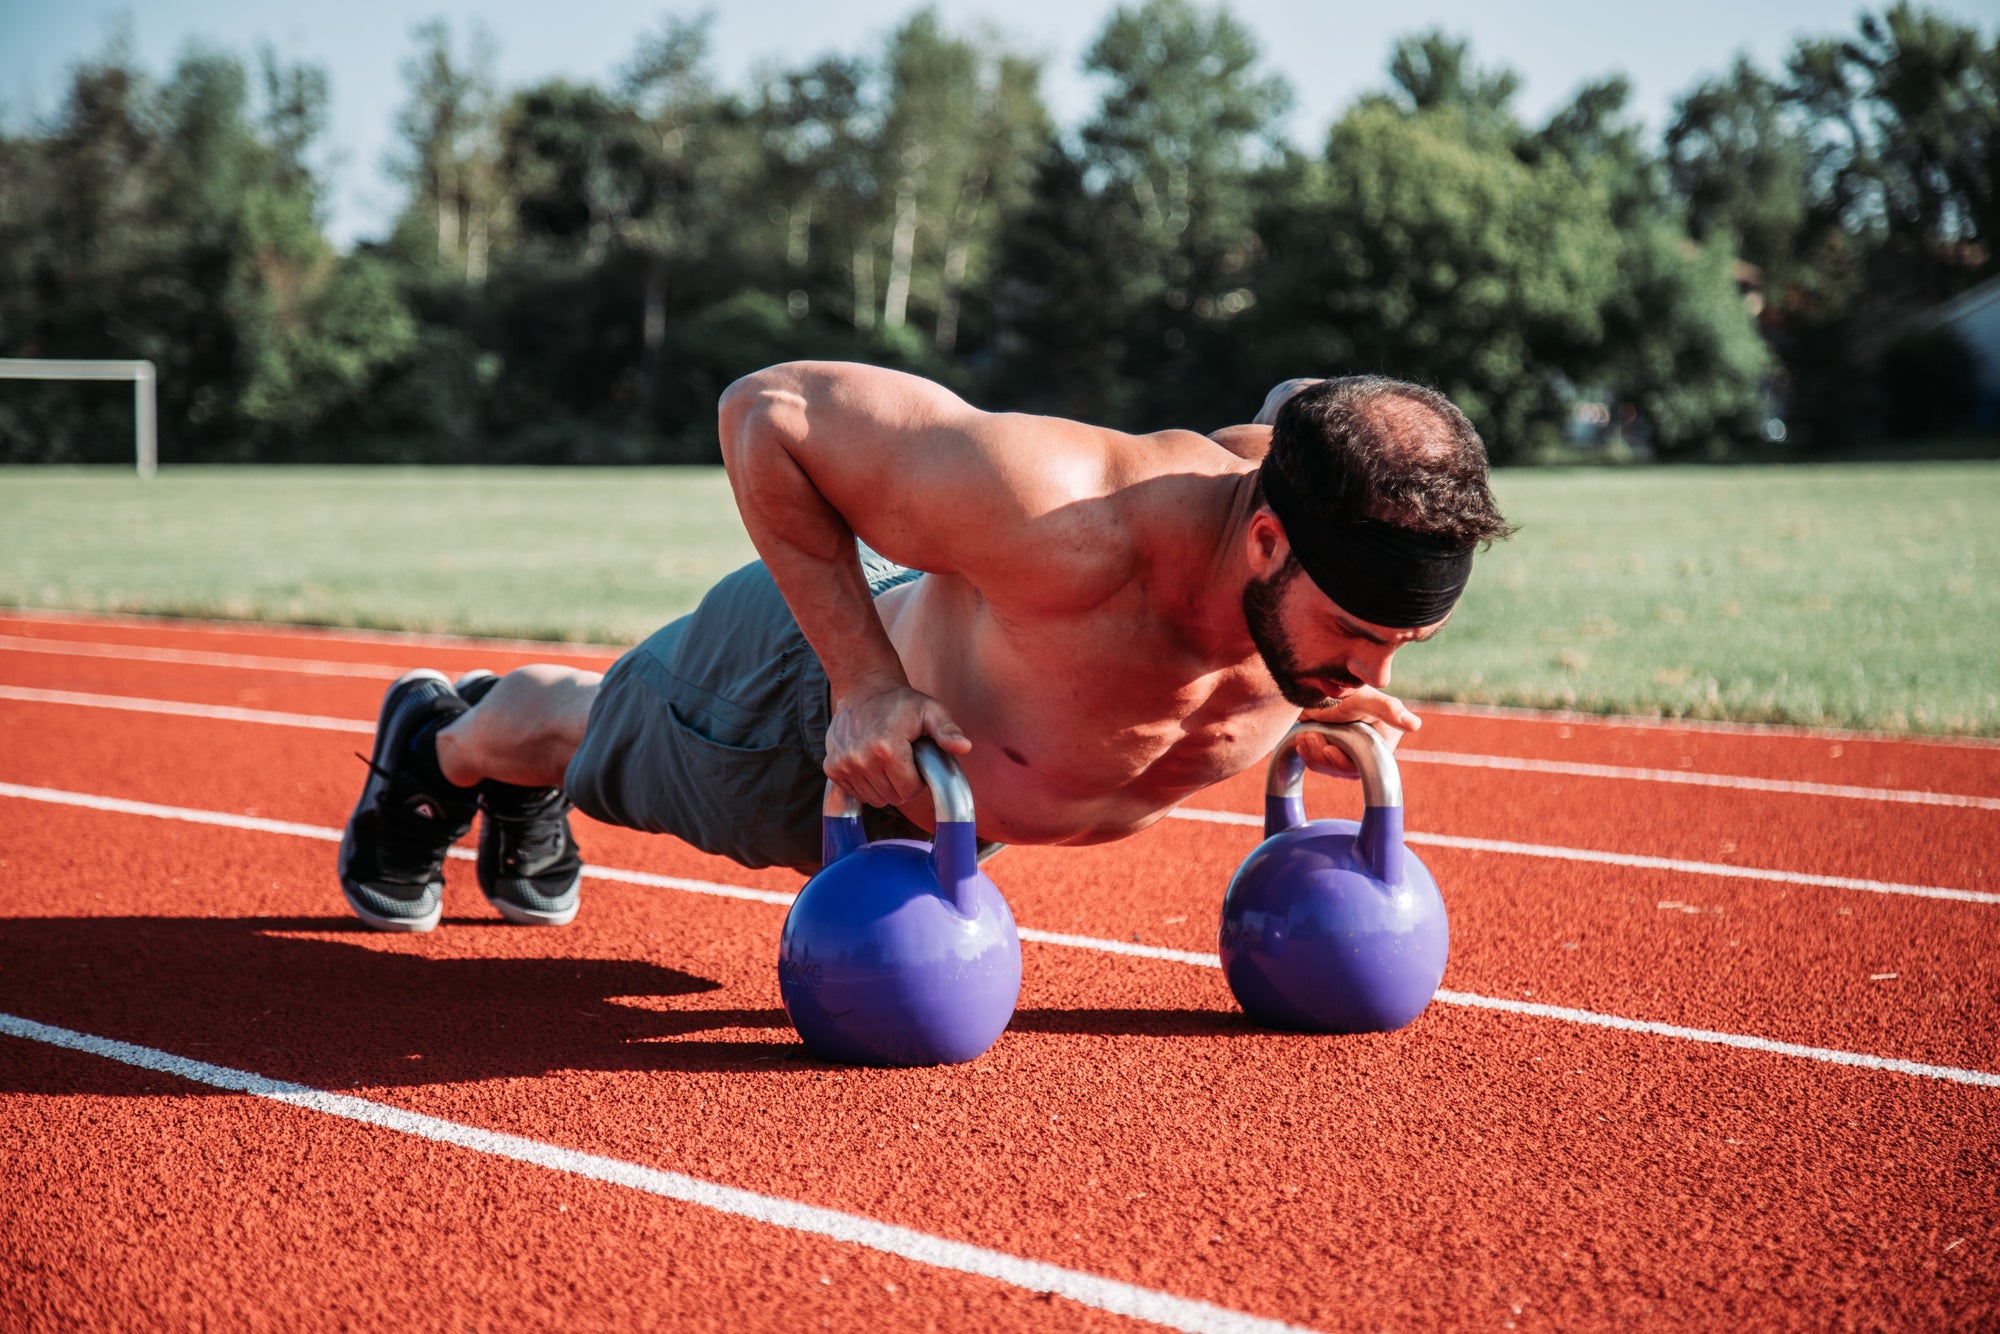 How to Do the Russian Kettlebell Swing and Get Optimal Benefits From it